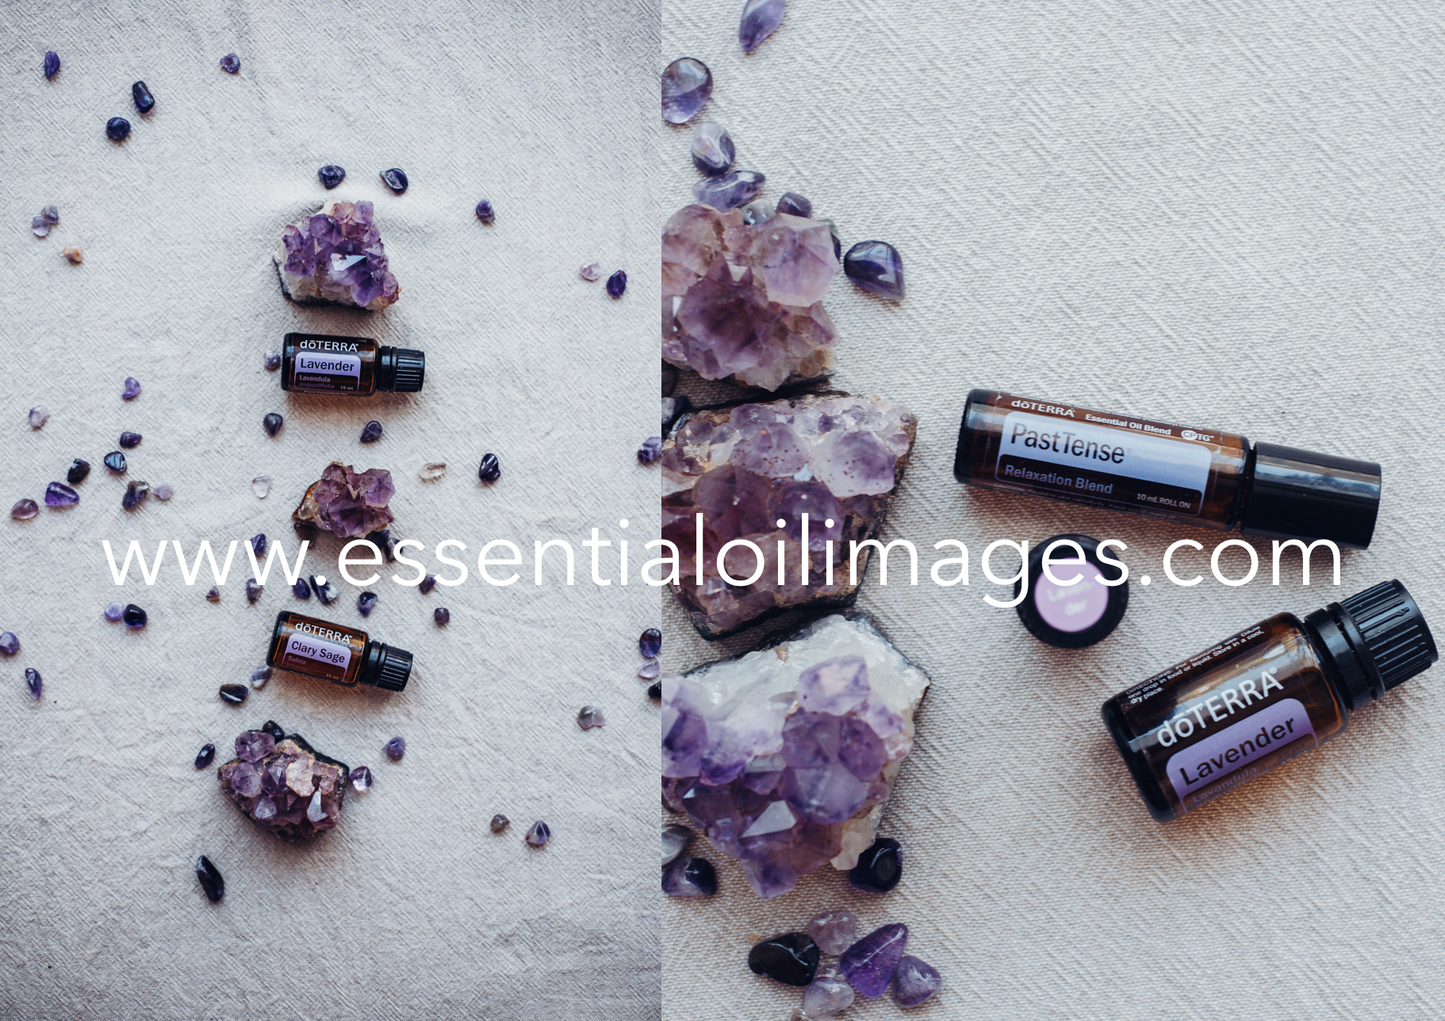 The Lavender Crystal Collection